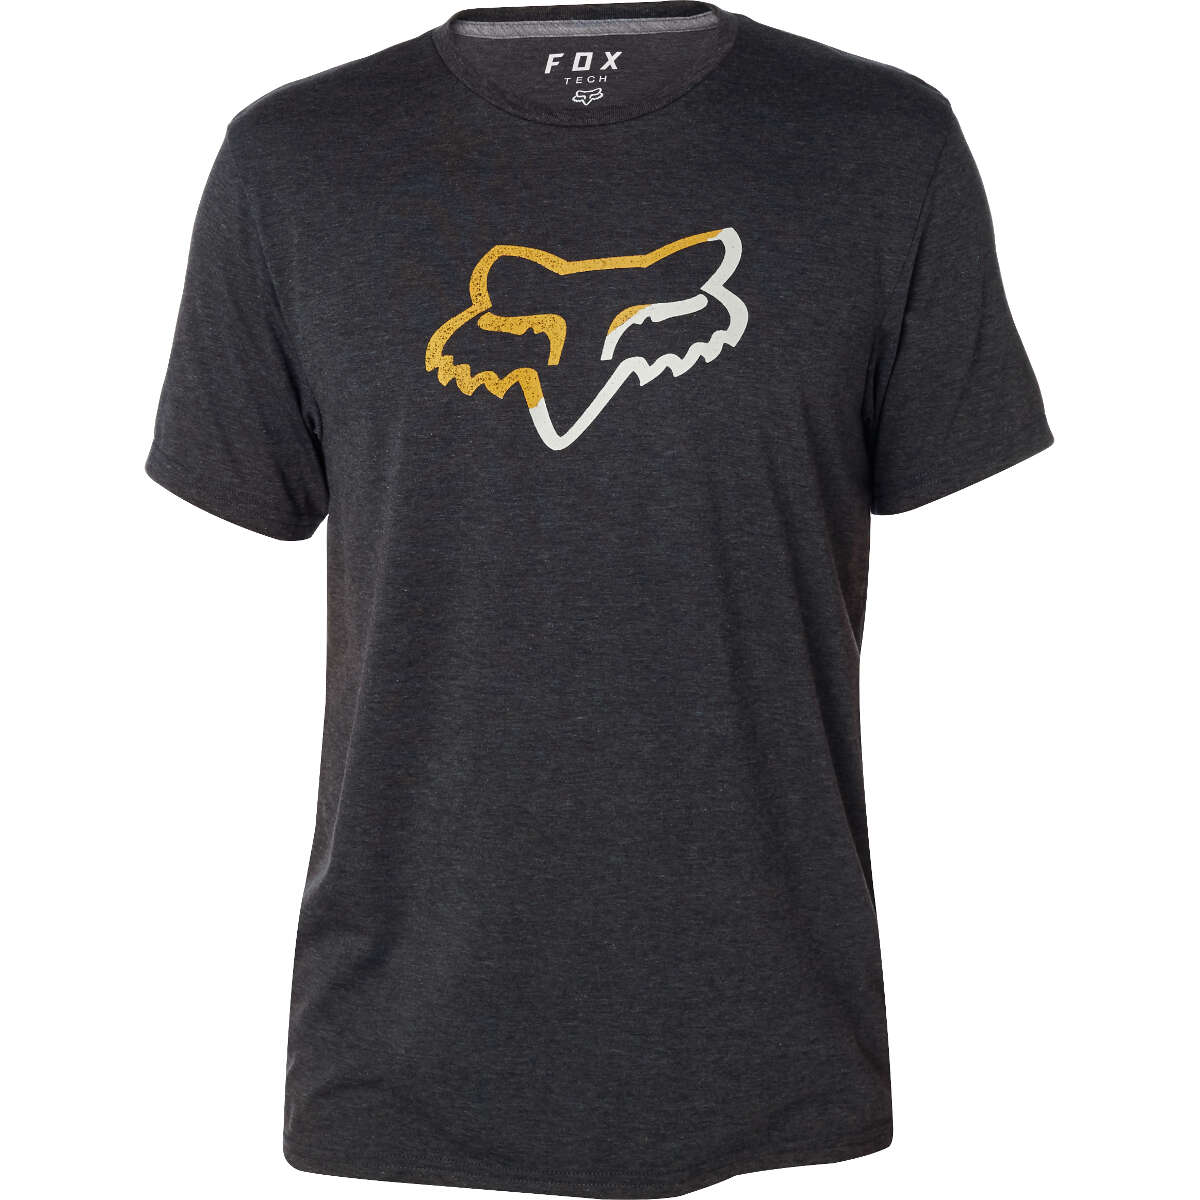 Fox Tech T-Shirt Planned Out Heather Black